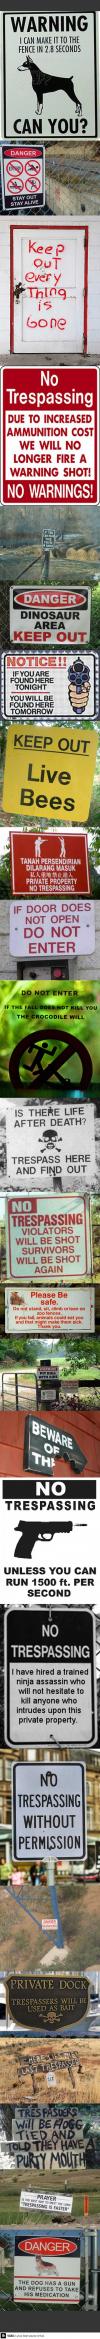 compilation, warning sign, keep out, private property, caution